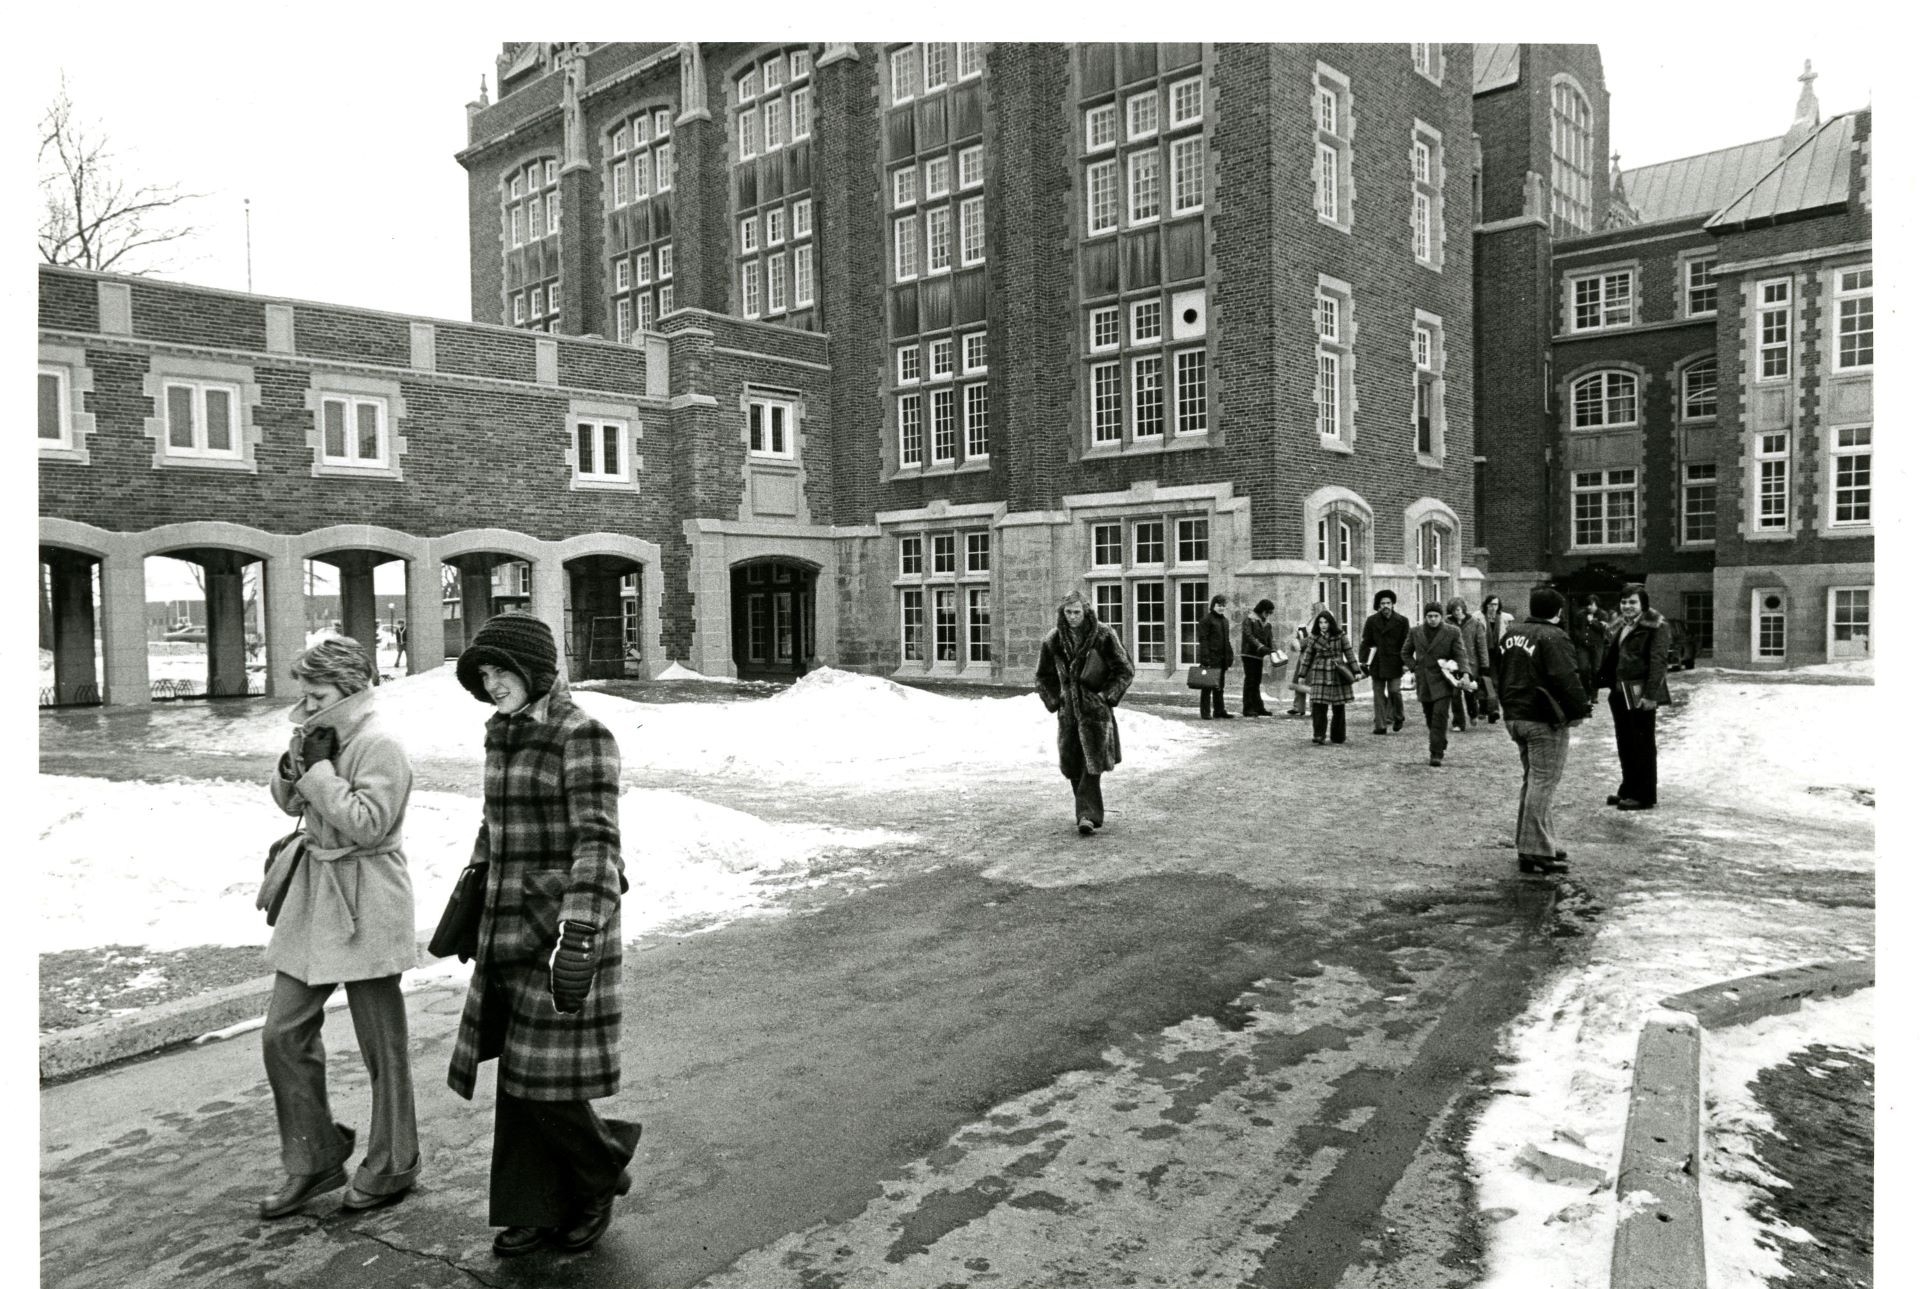 Students walking in winter attire across a snowy campus with traditional architecture in the background.